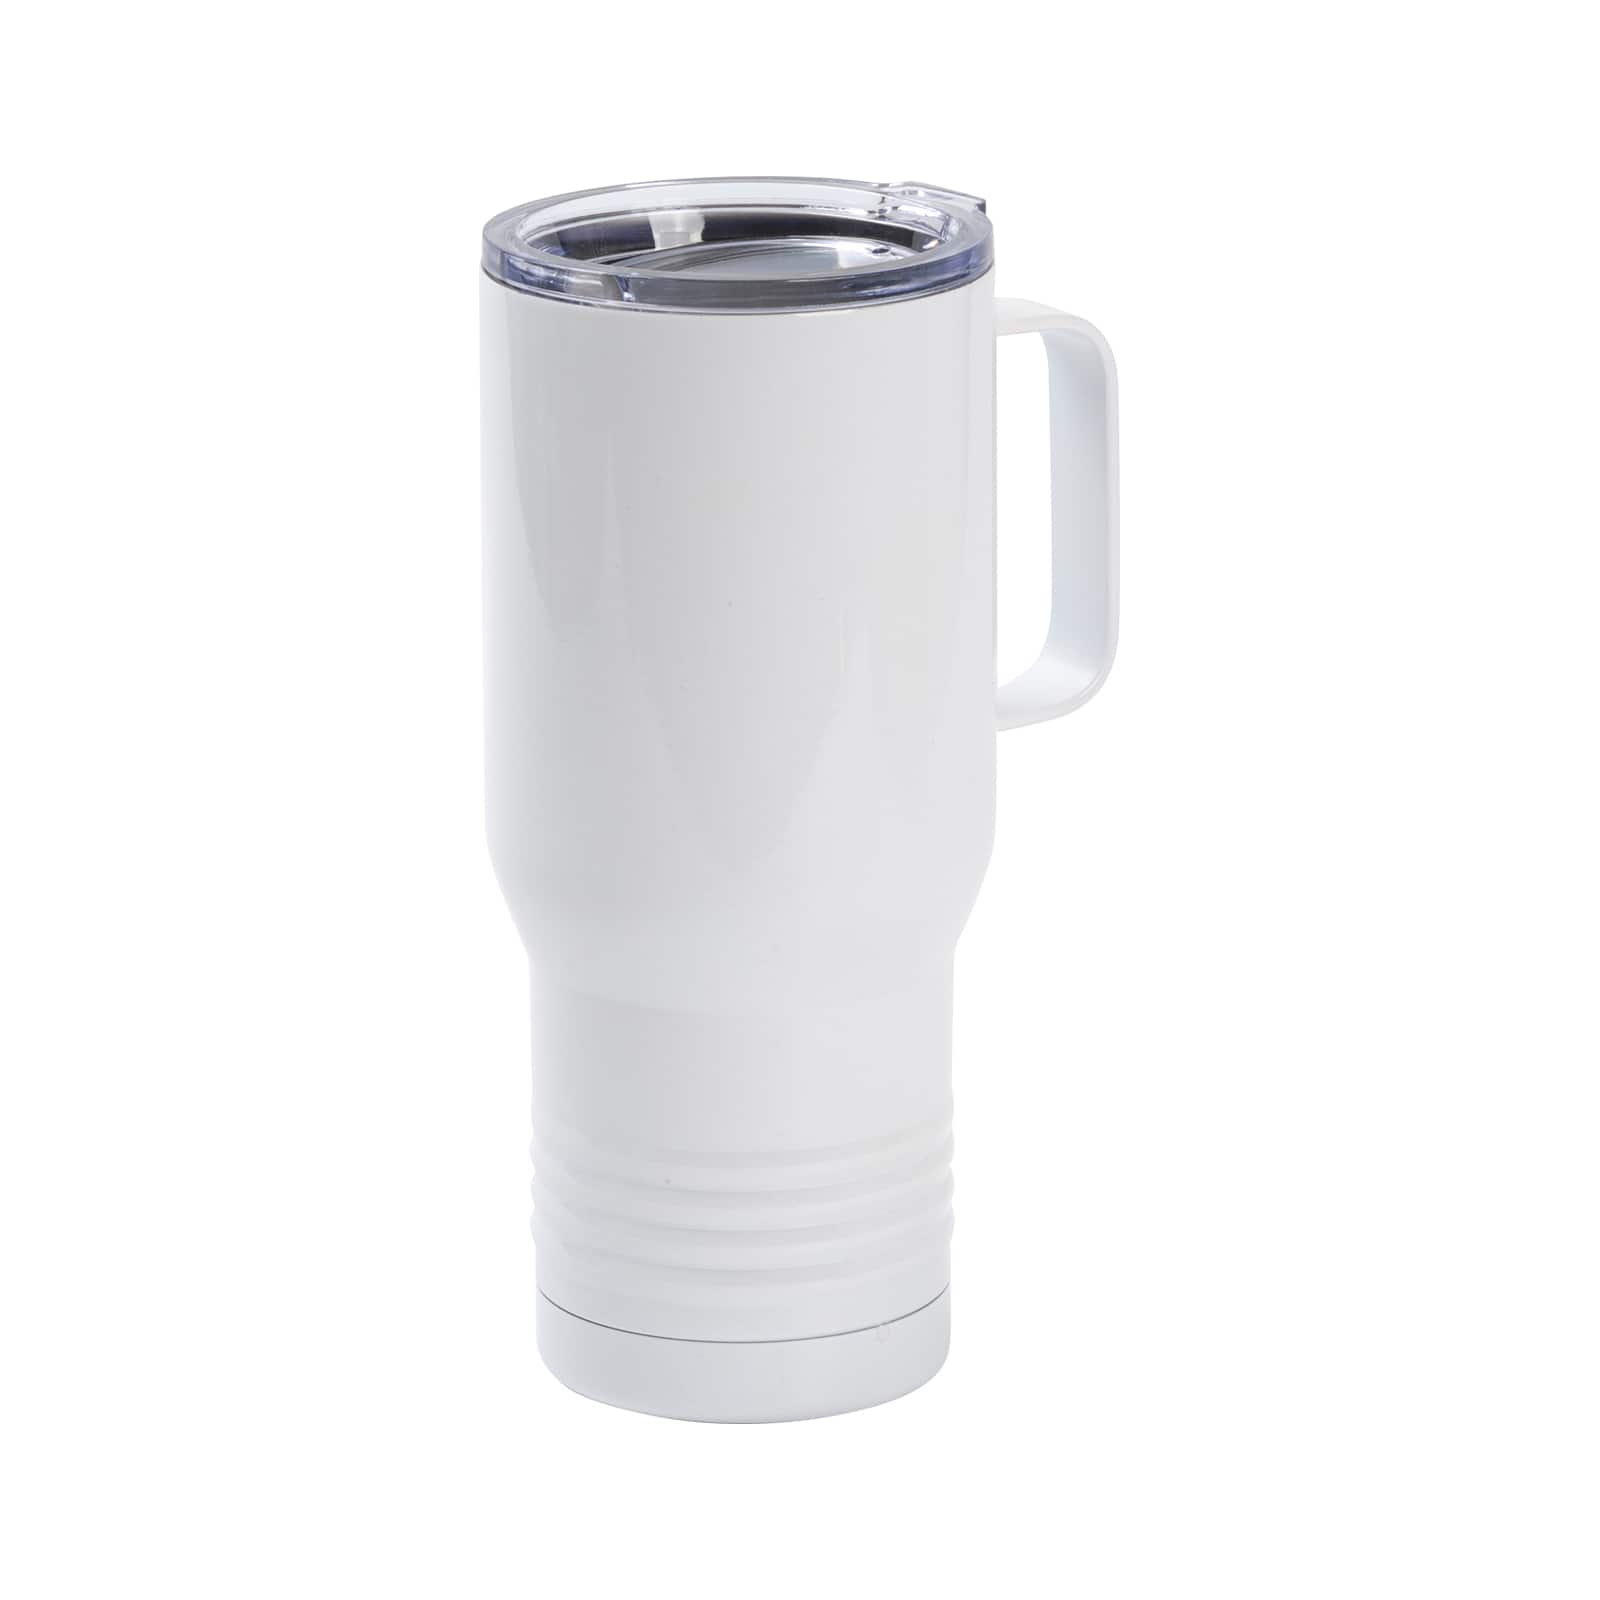 Craft Express 22oz. White Stainless Steel Tumbler with Ringneck